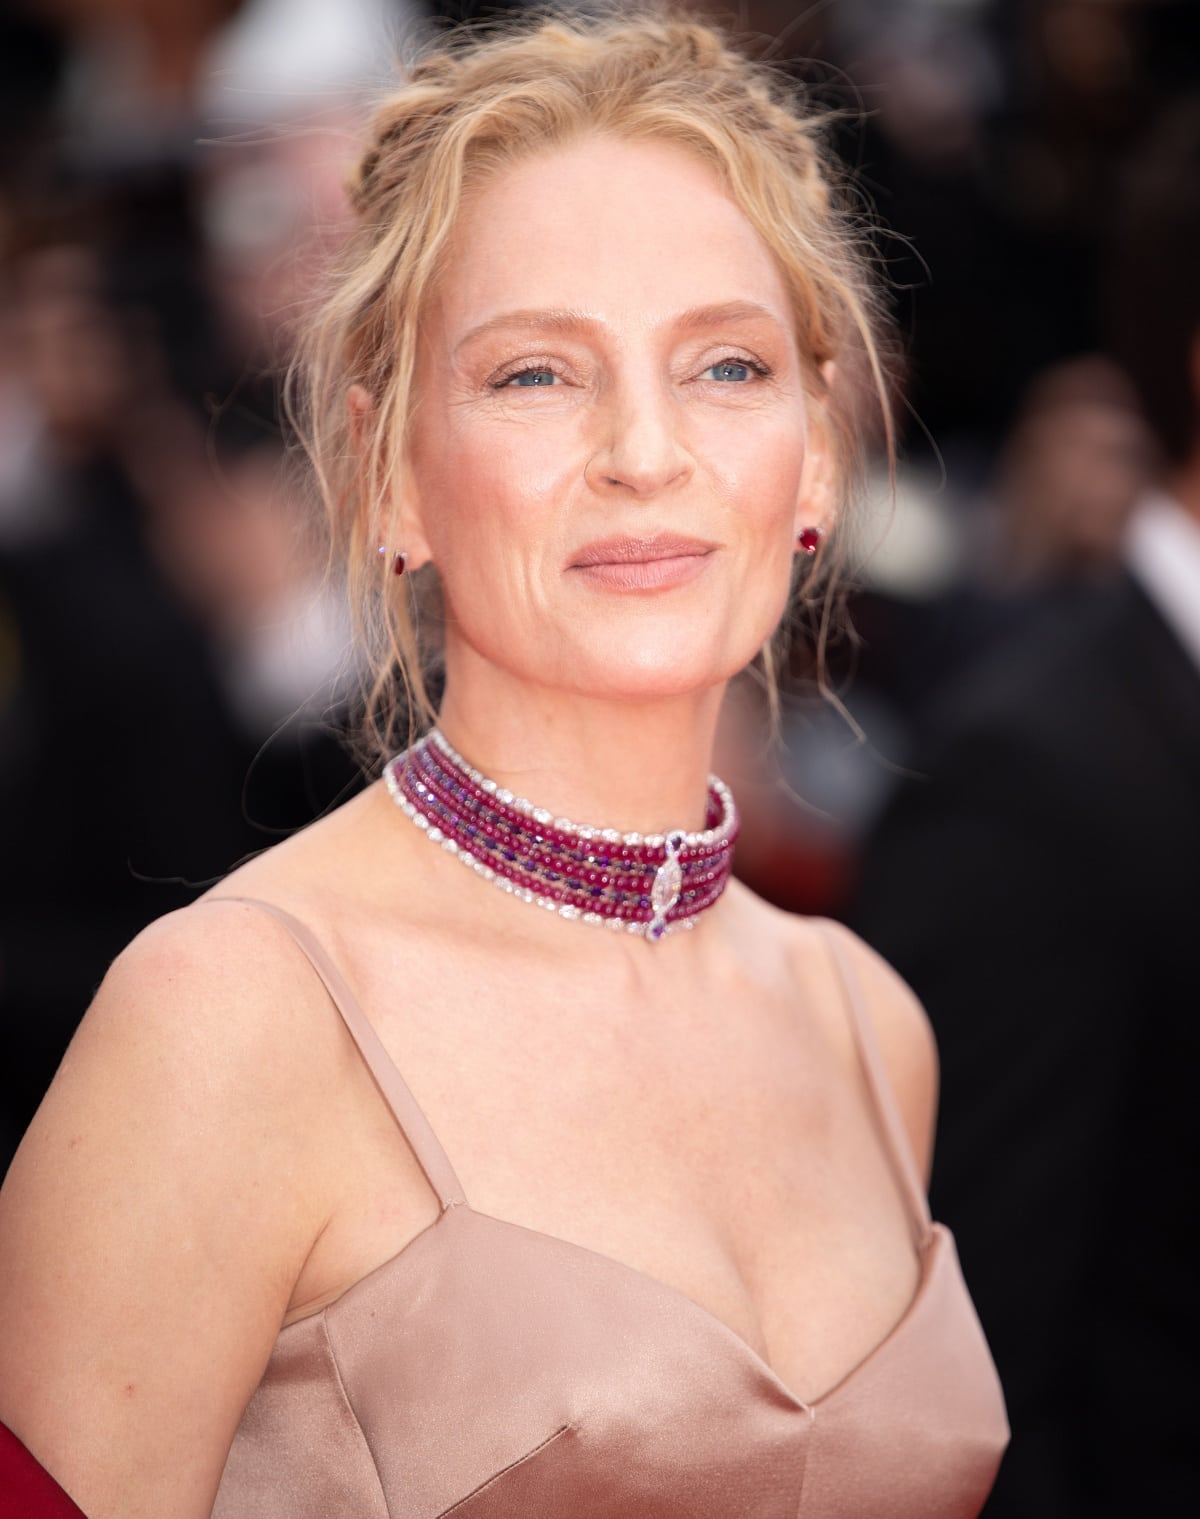 Uma Thurman kept her hair and makeup styling minimal to keep the focus on her stunning ensemble